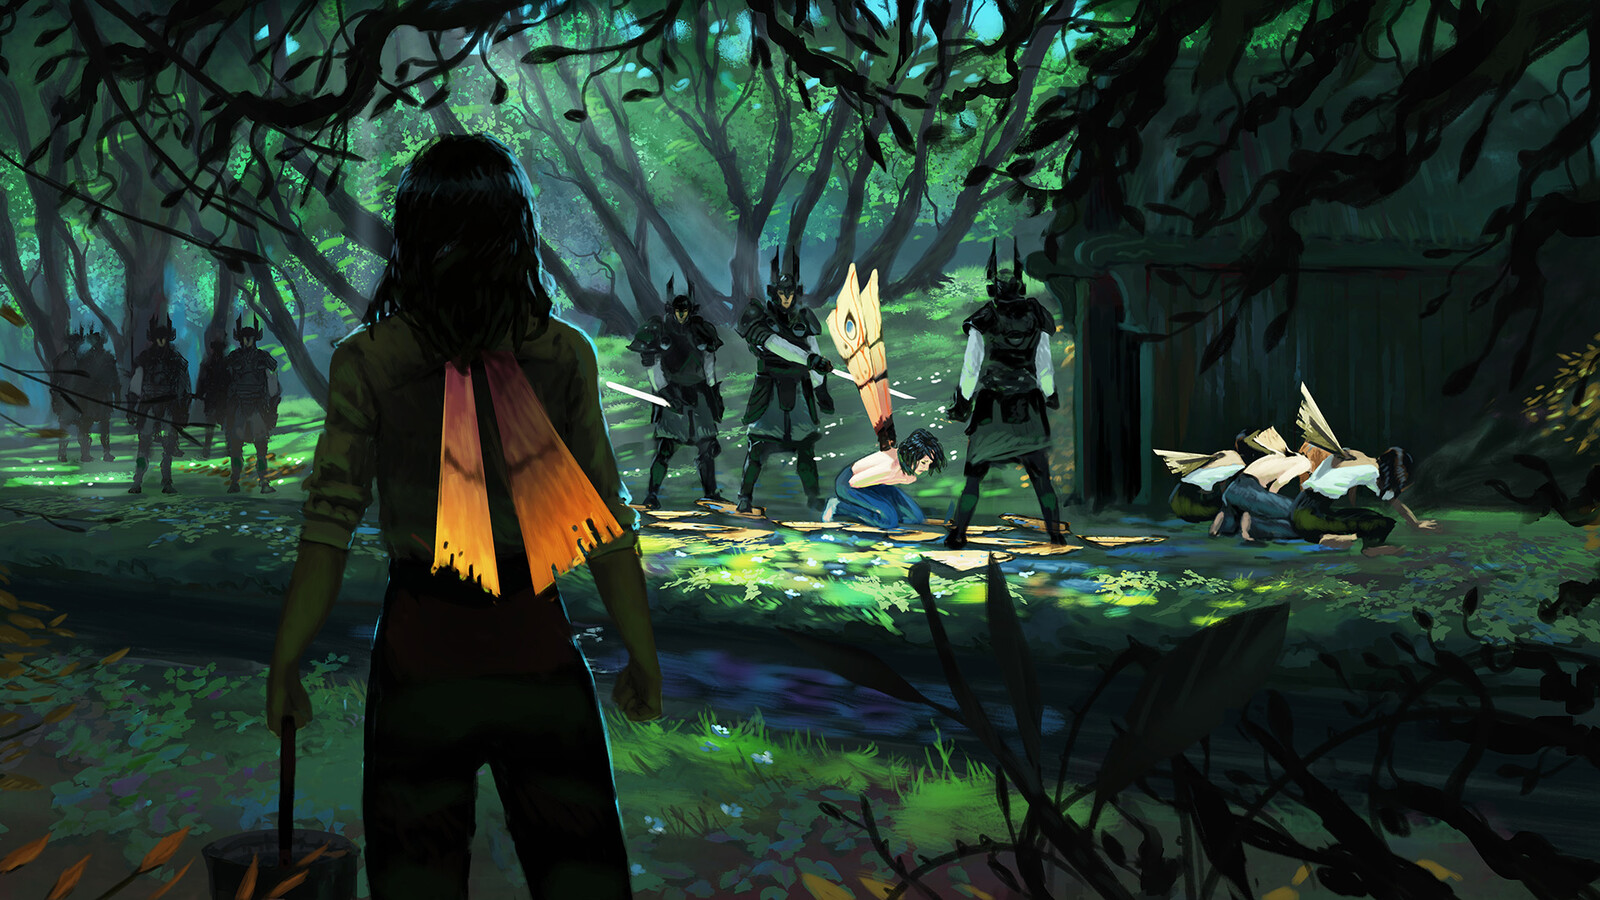 Keyframe 1: The people are persecuted by the invaders. An elf, also a victim in the past, witnesses the scene.